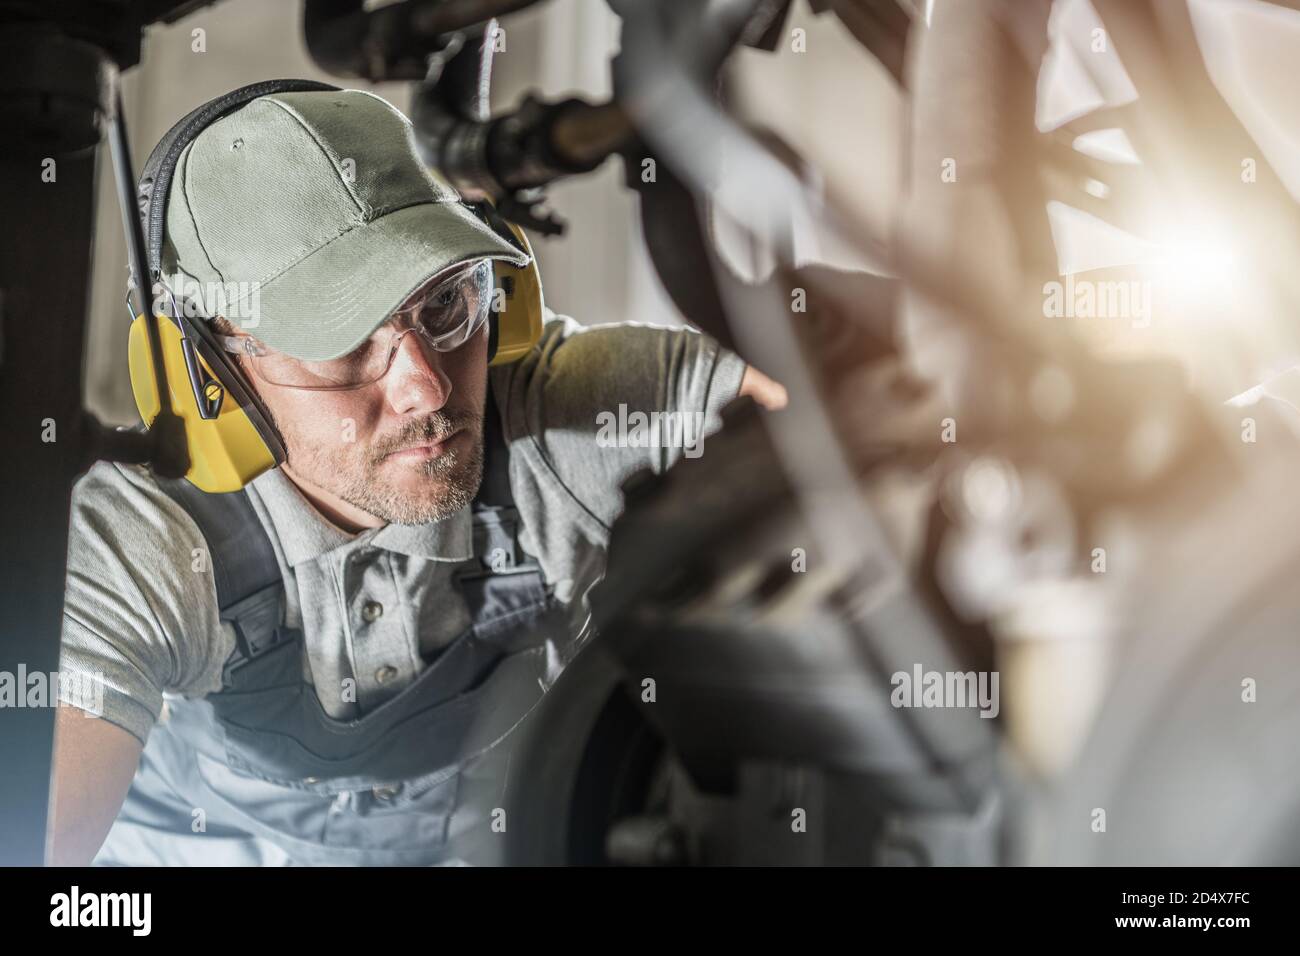 Caucasian Automotive Industry Technician in His 40s Wearing Safety Glasses Looking Into Engine Compartment To Spot Potential Issue with the Vehicle Po Stock Photo